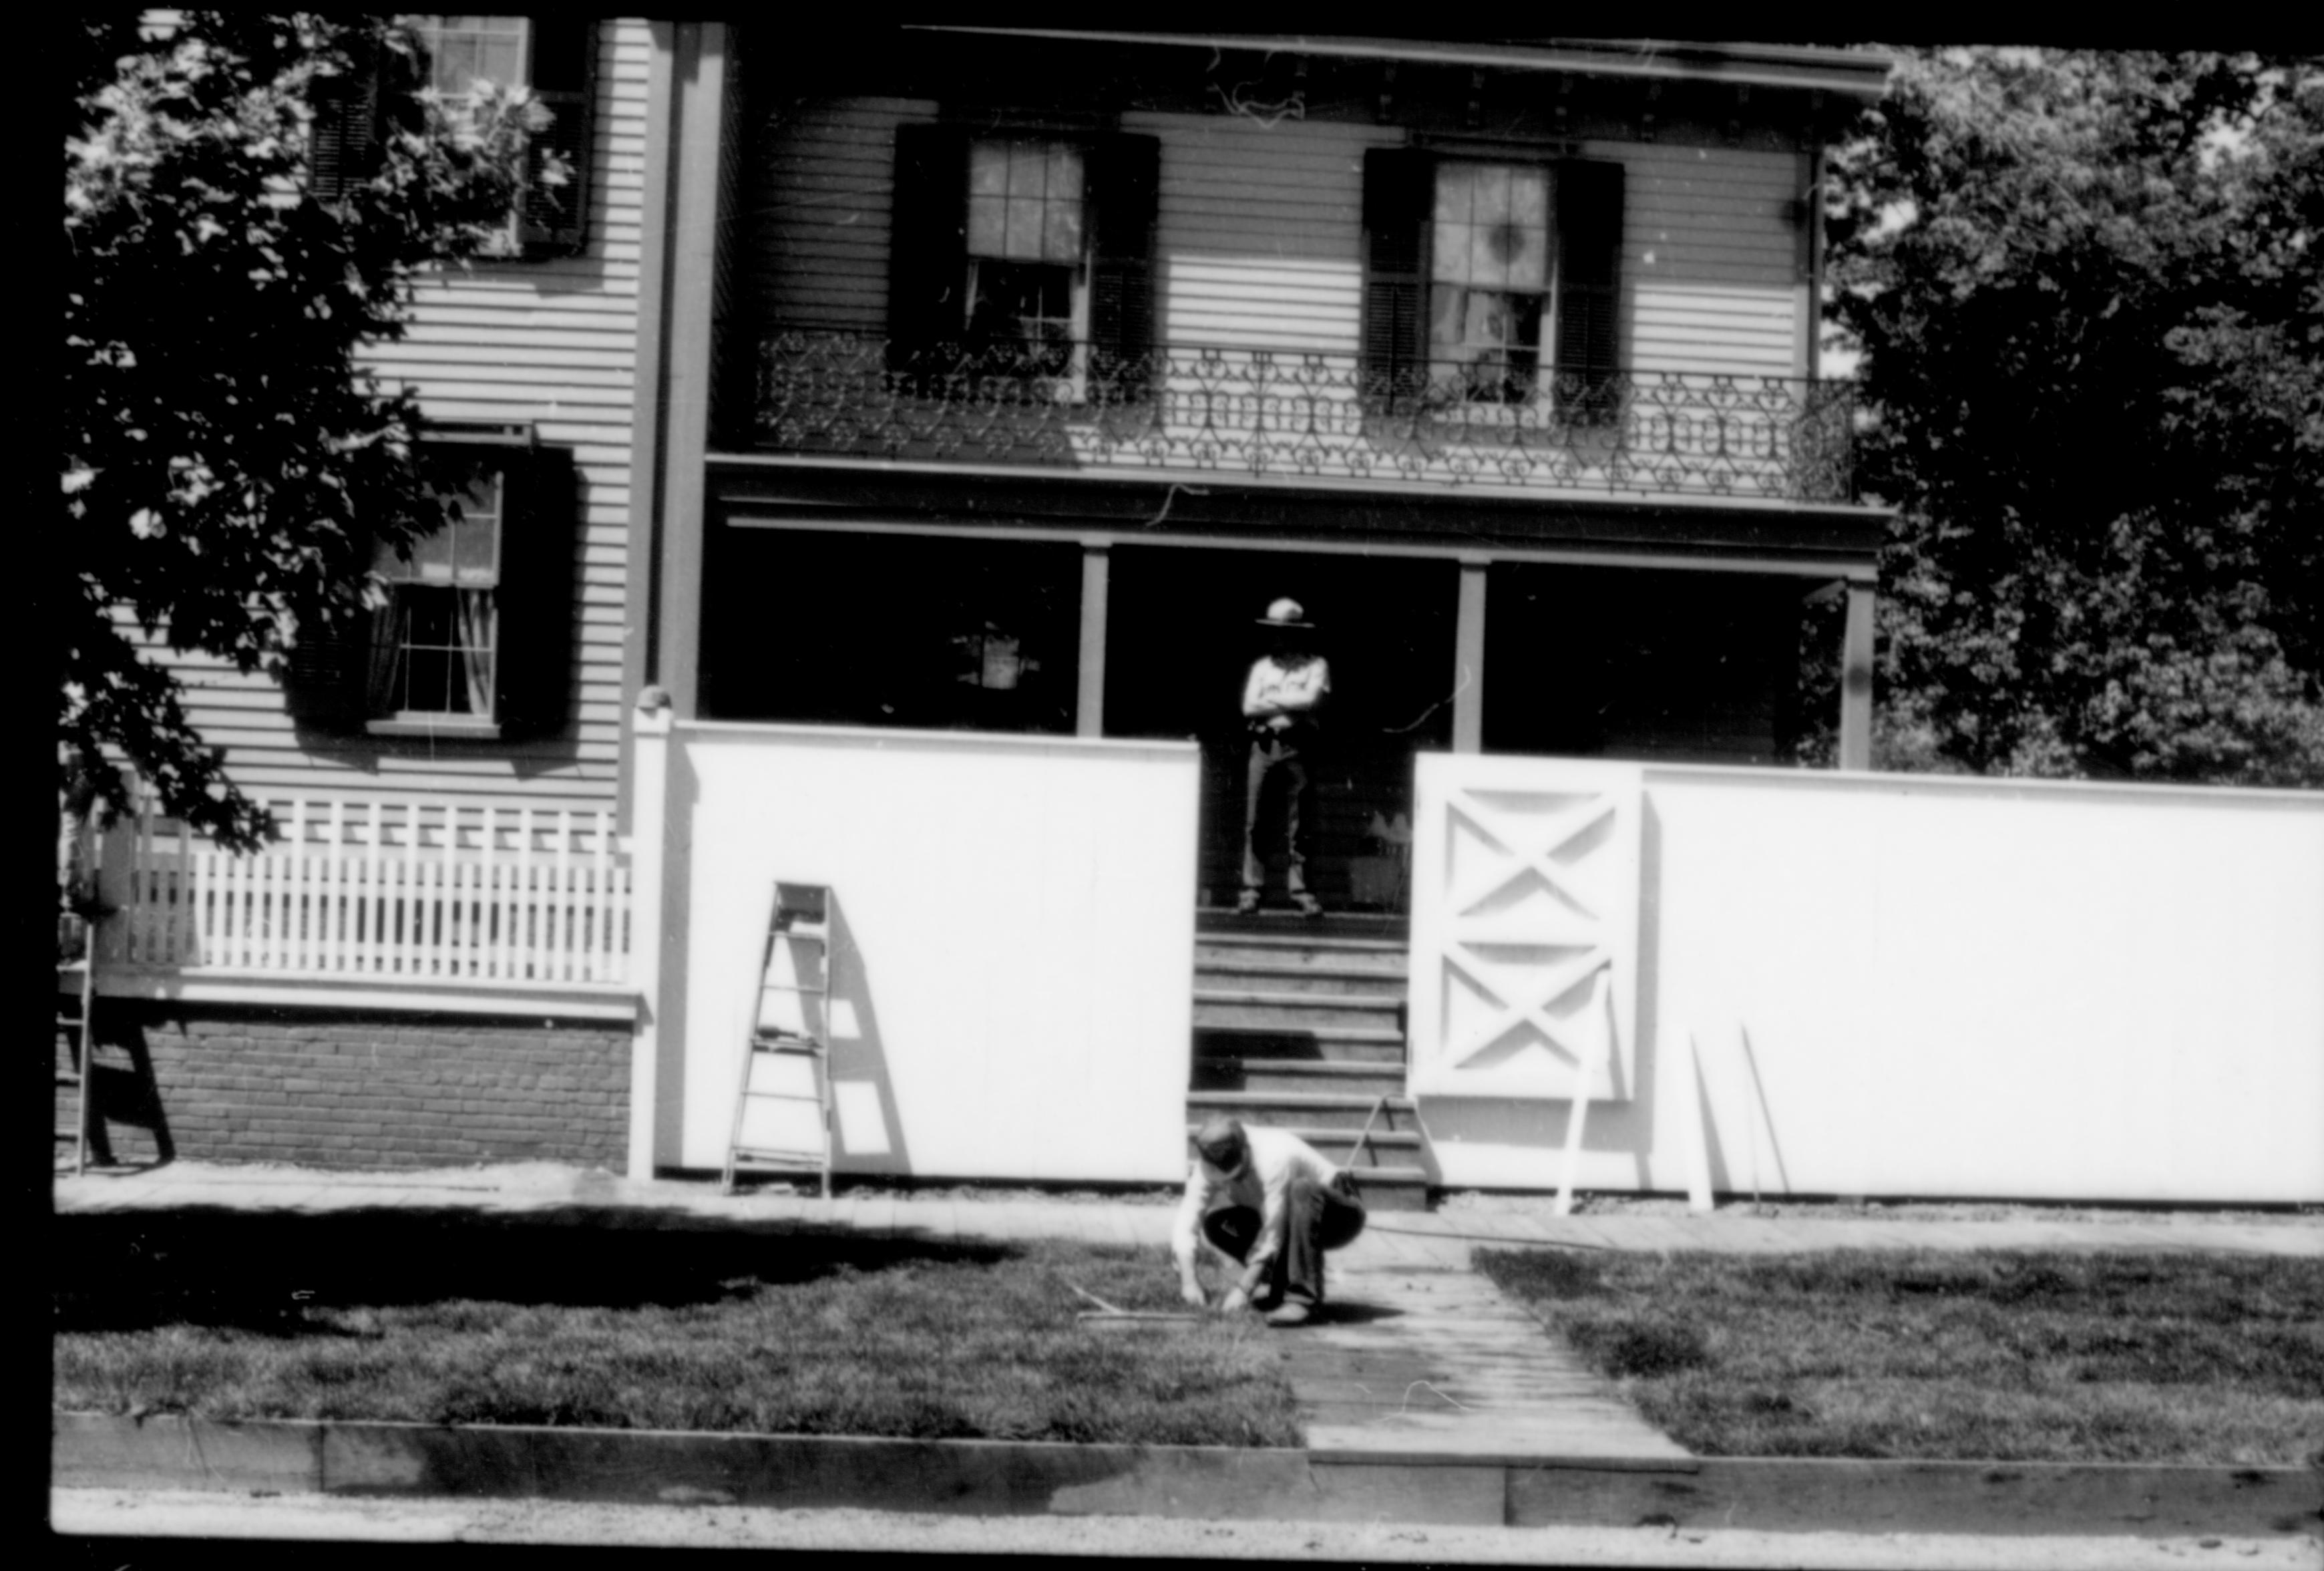 View of the south facing of the Lincoln Home during the 1987-88 restoration. One ranger on back porch, with two workers painting the fence. Photographer facing north.